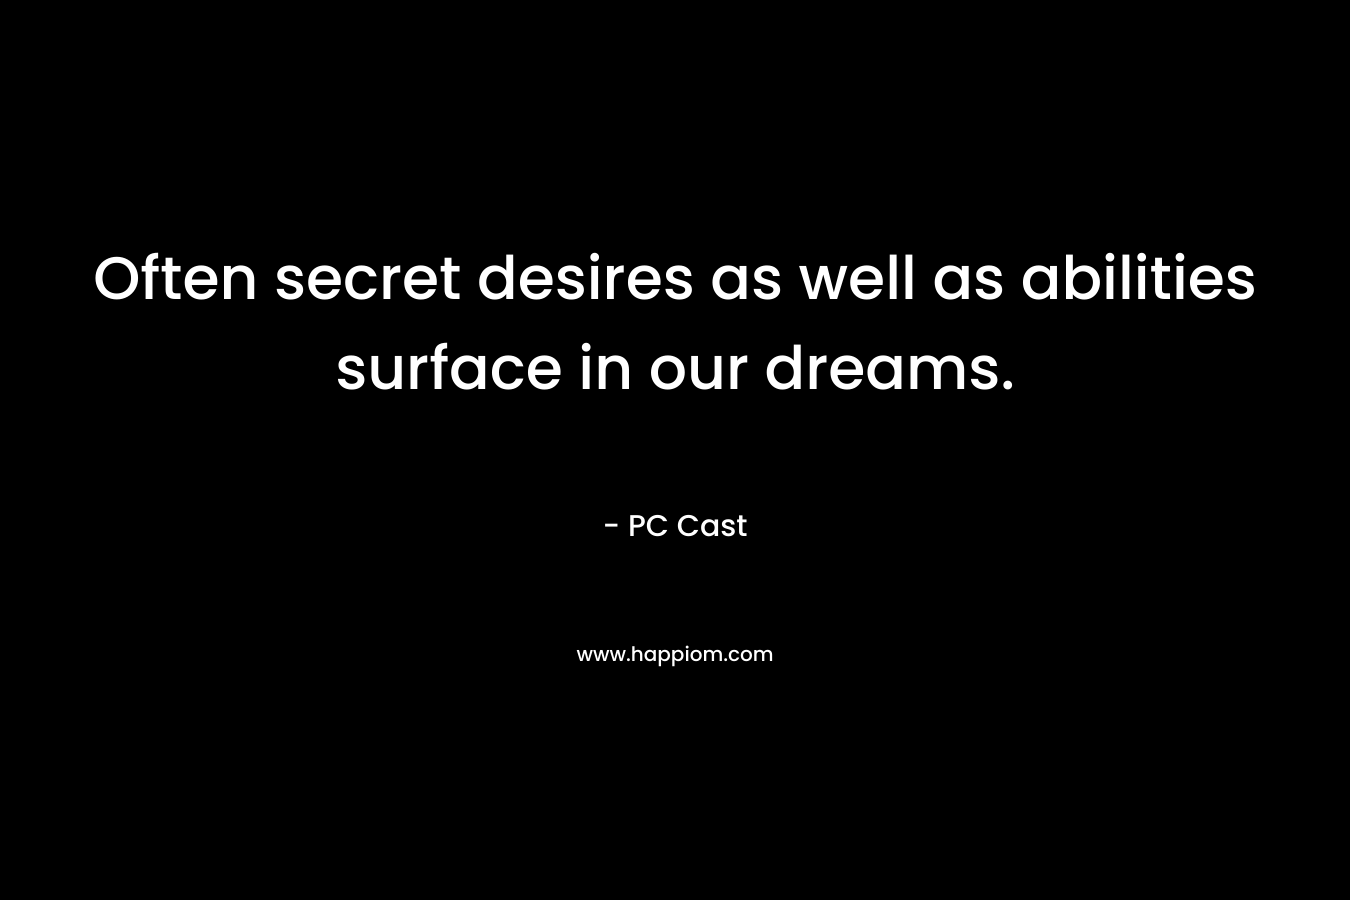 Often secret desires as well as abilities surface in our dreams. – PC Cast